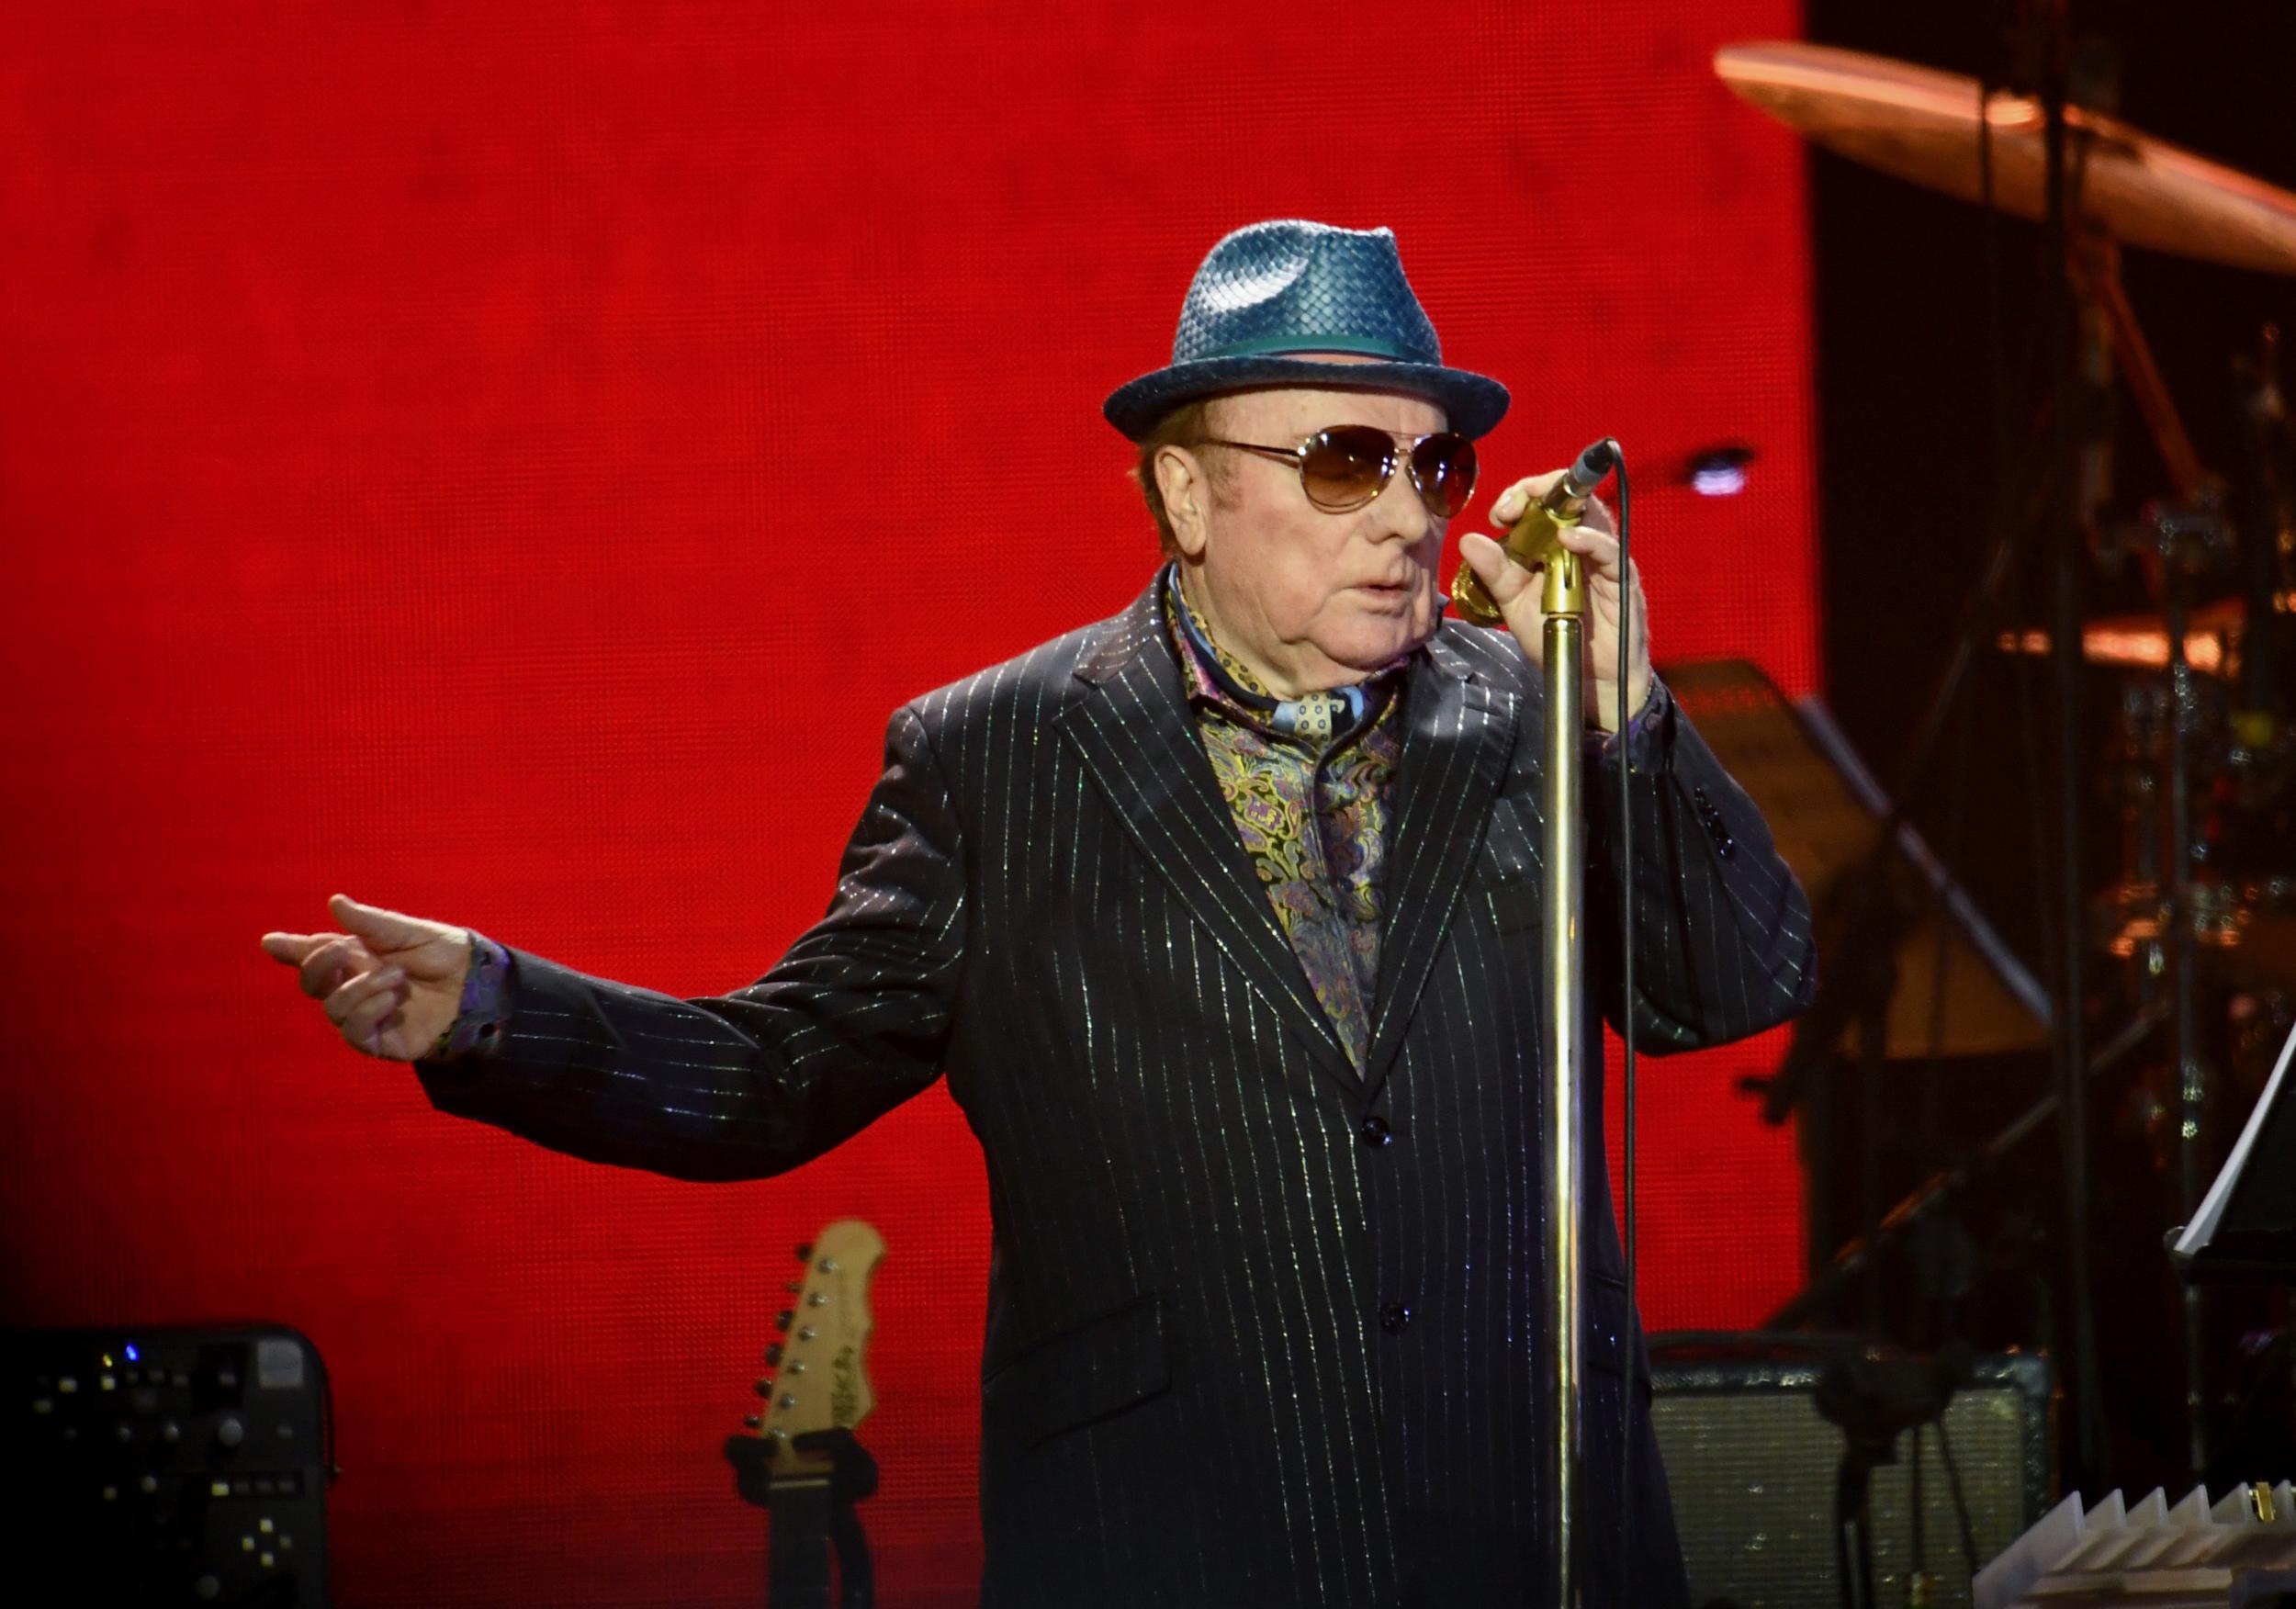 Van Morrison performs on stage during Music For The Marsden 2020 at The O2 Arena in March 2020 in London